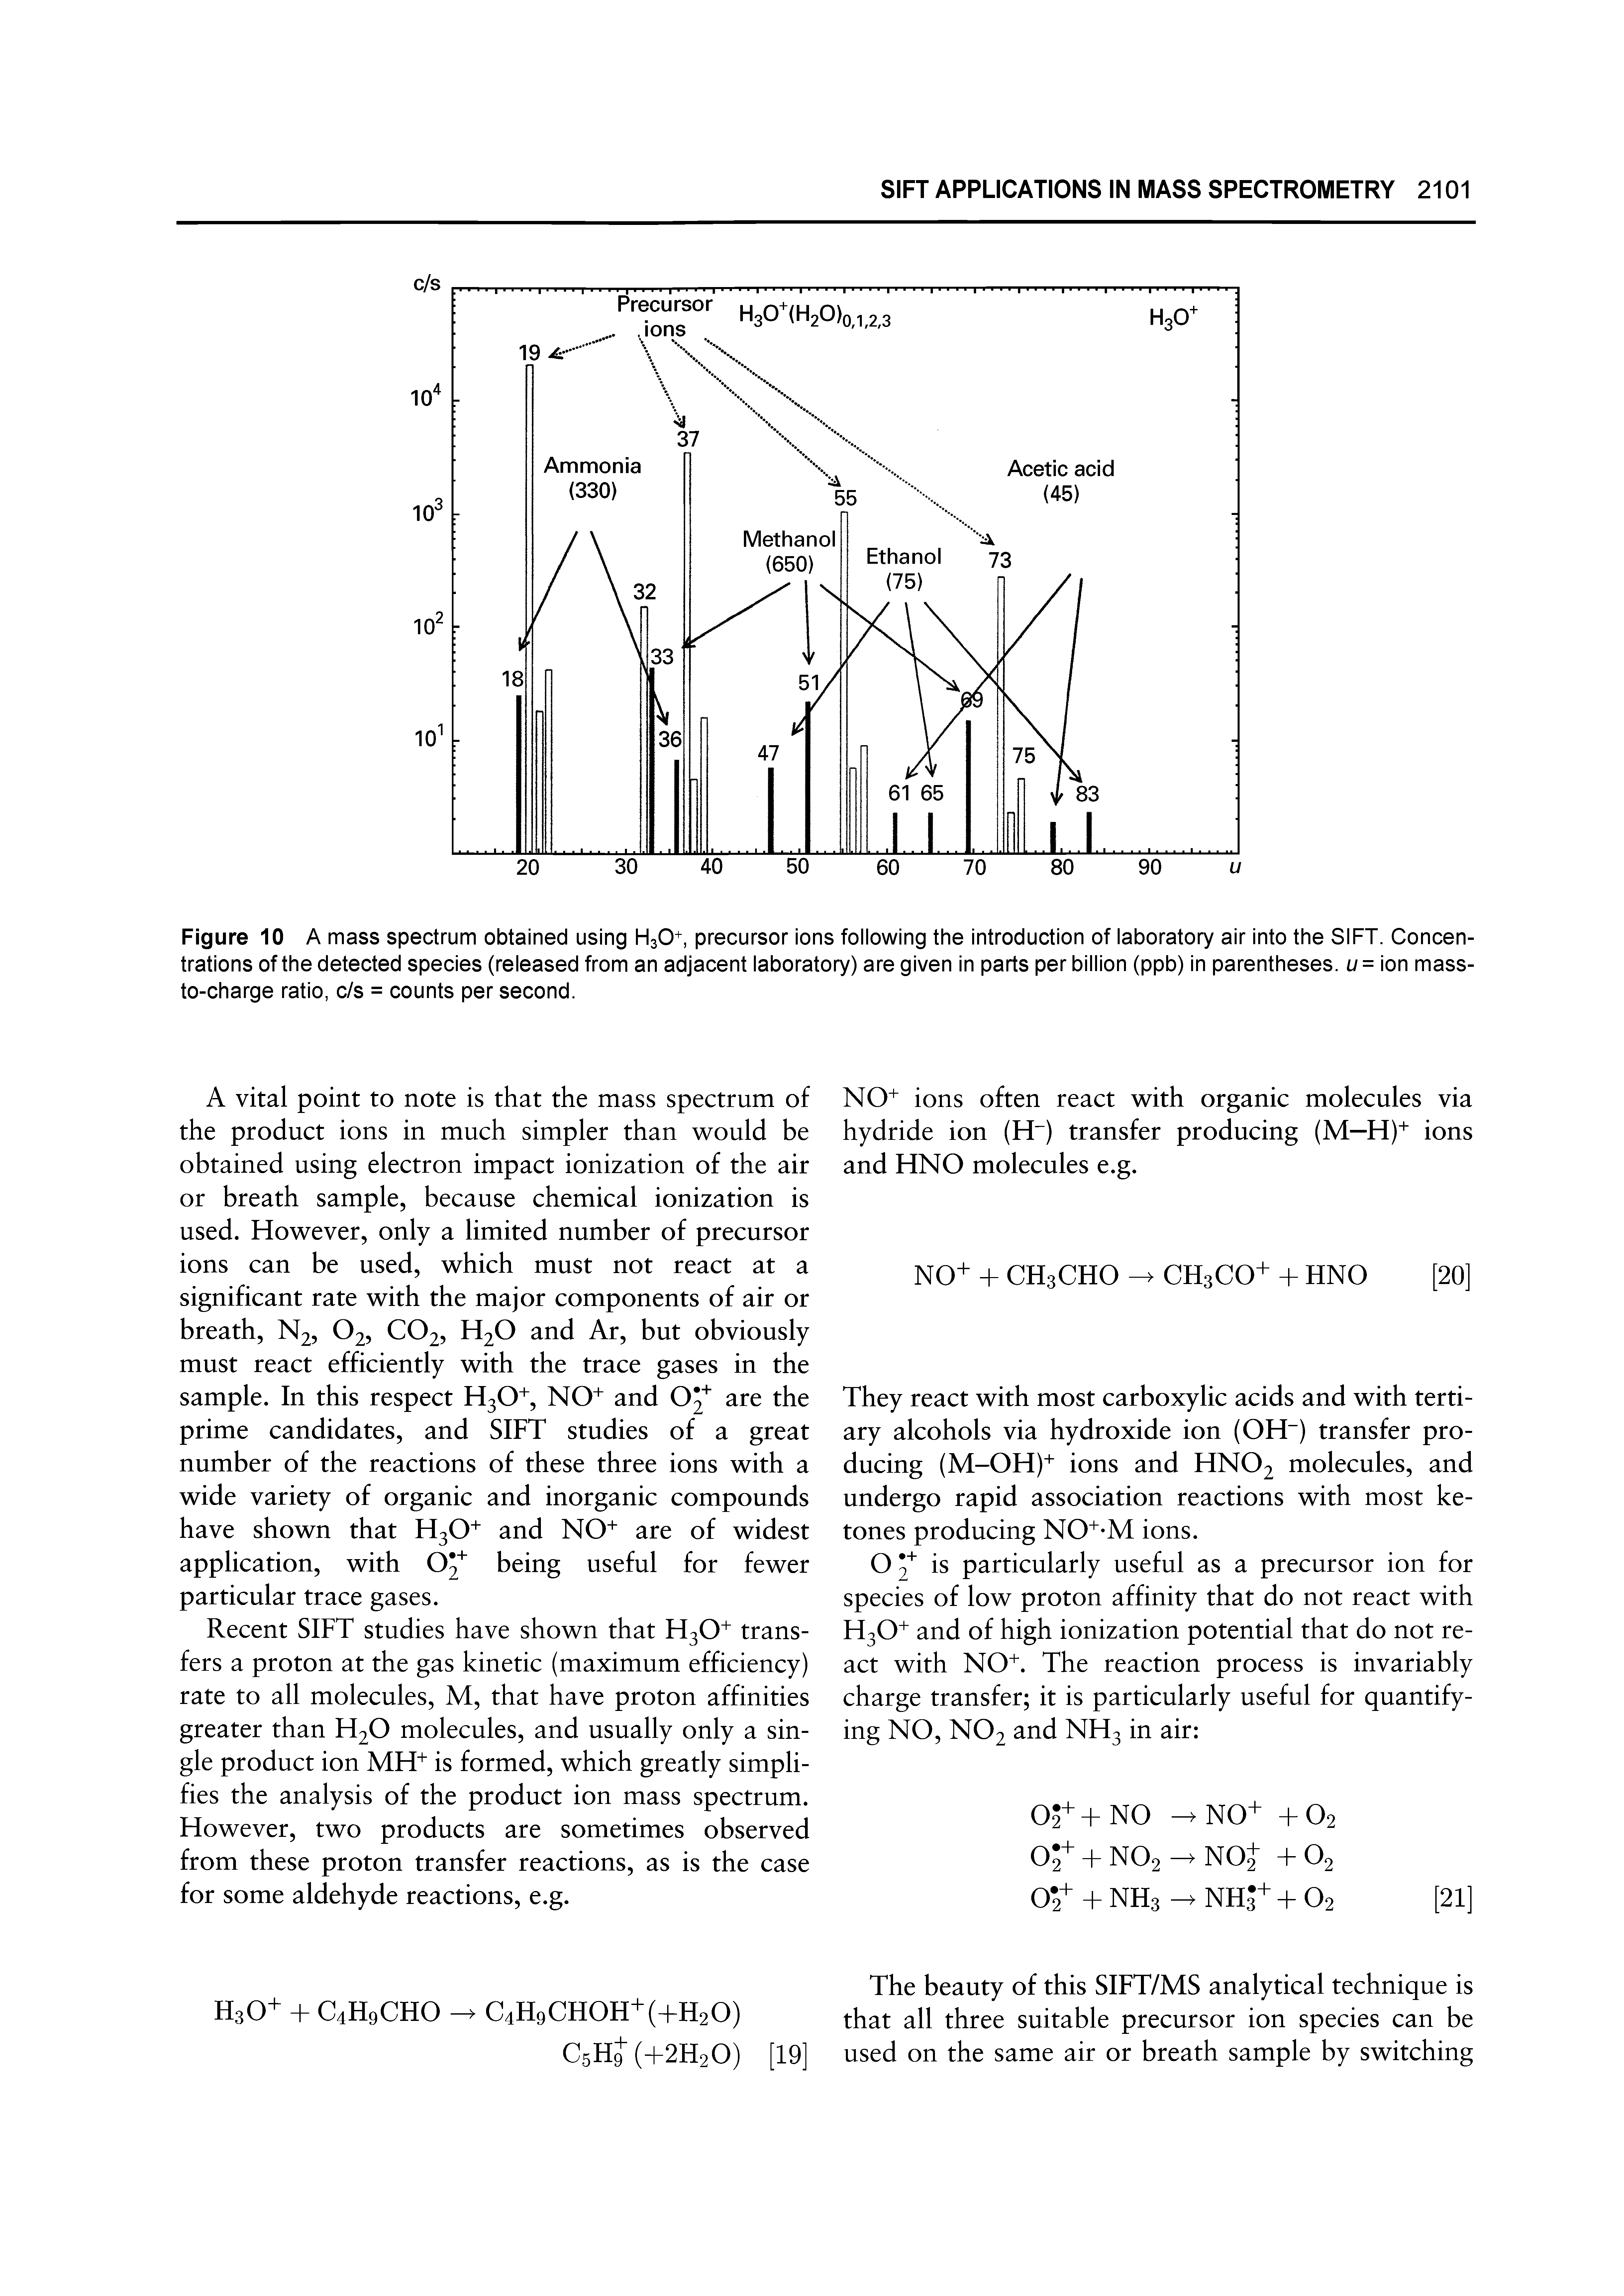 Figure 10 A mass spectrum obtained using H3O+, precursor ions following the introduction of laboratory air into the SIFT. Concentrations of the detected species (released from an adjacent laboratory) are given in parts per billion (ppb) in parentheses, u = ion mass-to-charge ratio, c/s = counts per second.